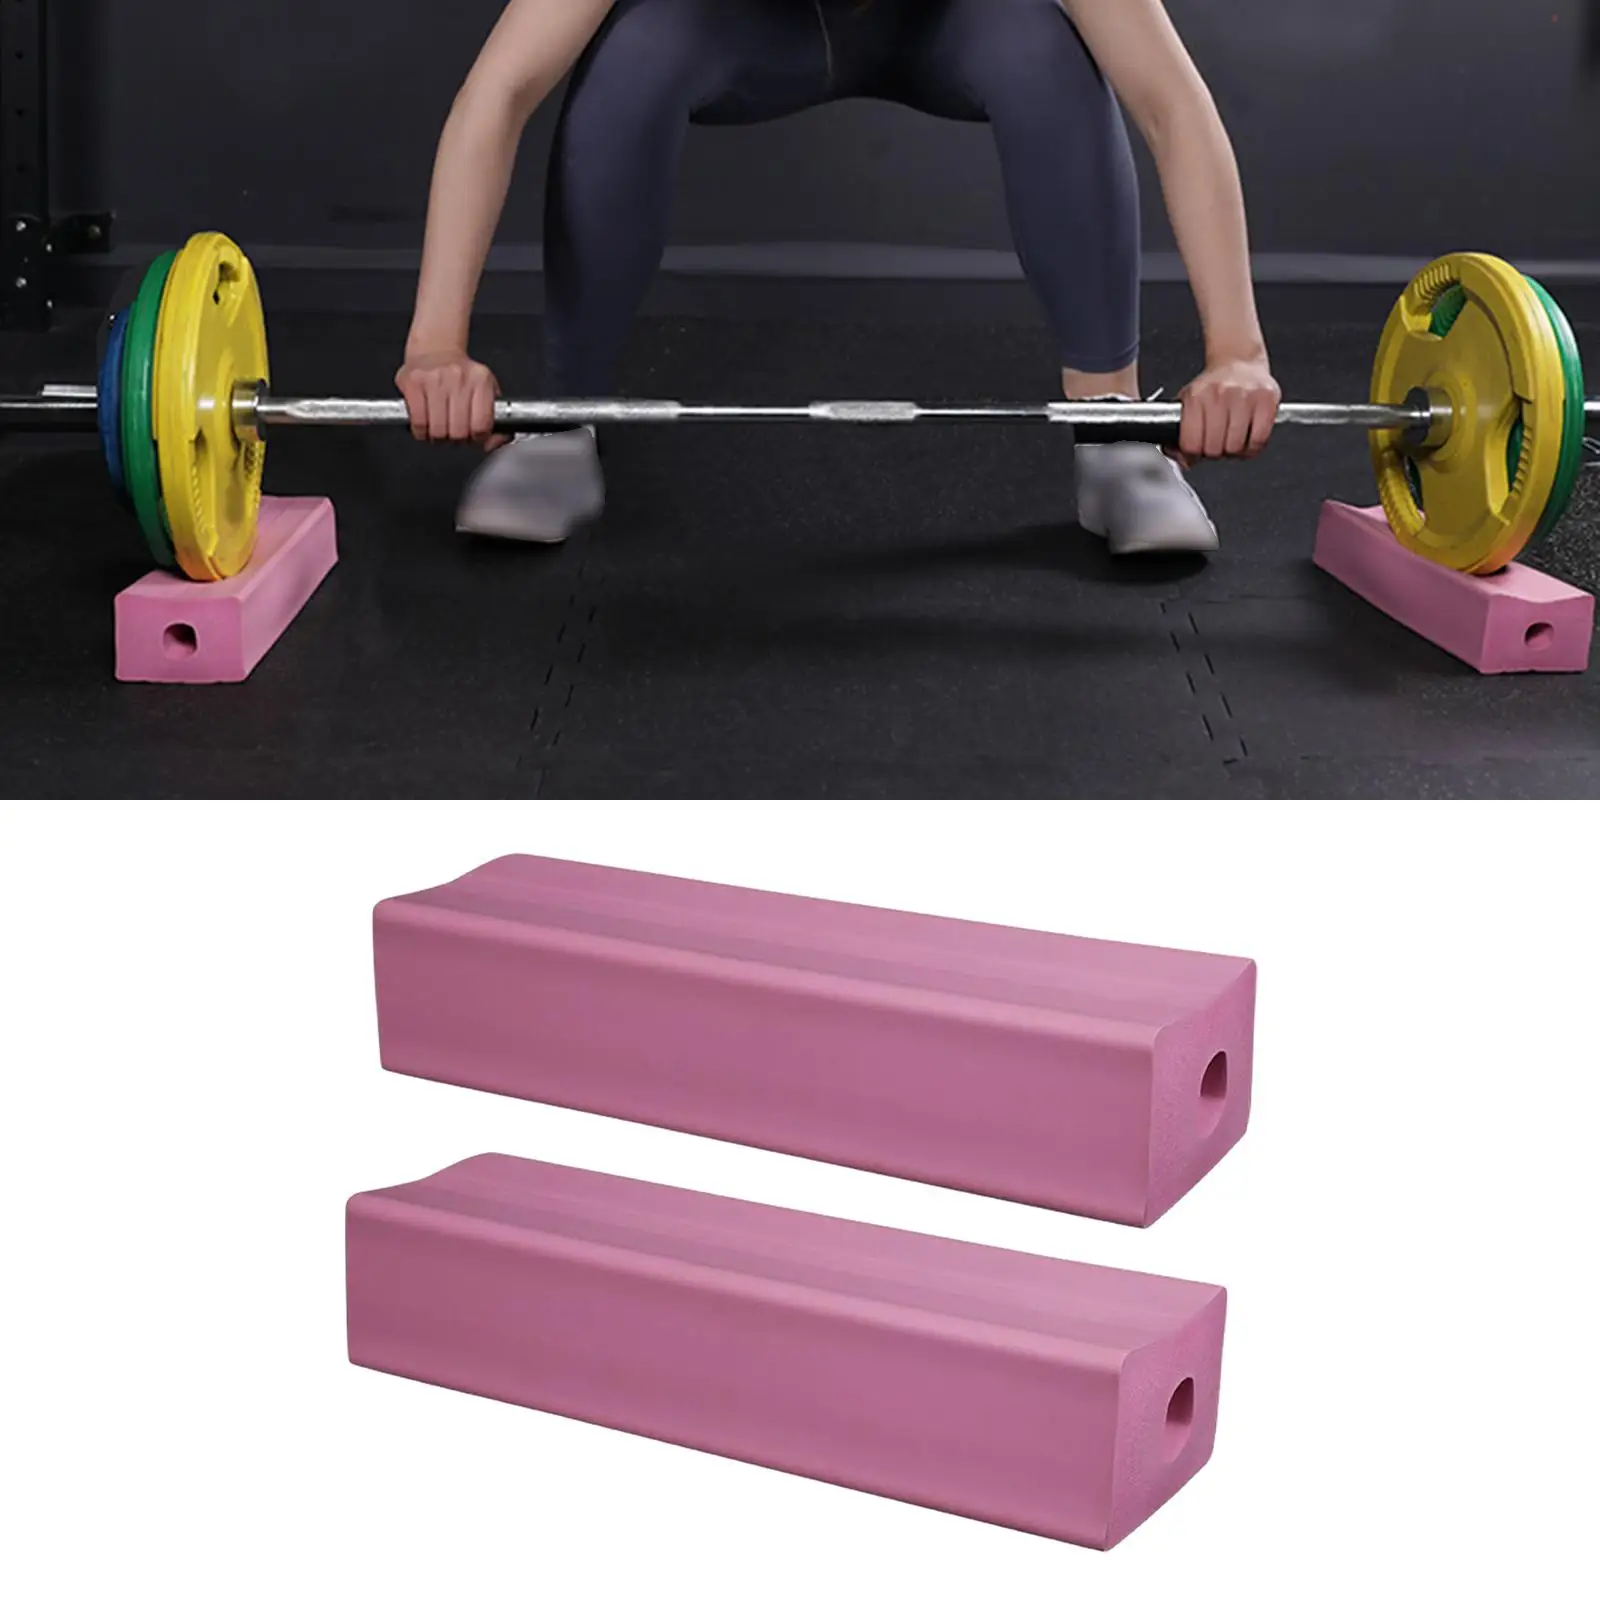 Fitness Barbell Pad Protecting Floor Reducing Noise Padded Cushion for Weightlifting Training Power Lifting Exercises Fitness